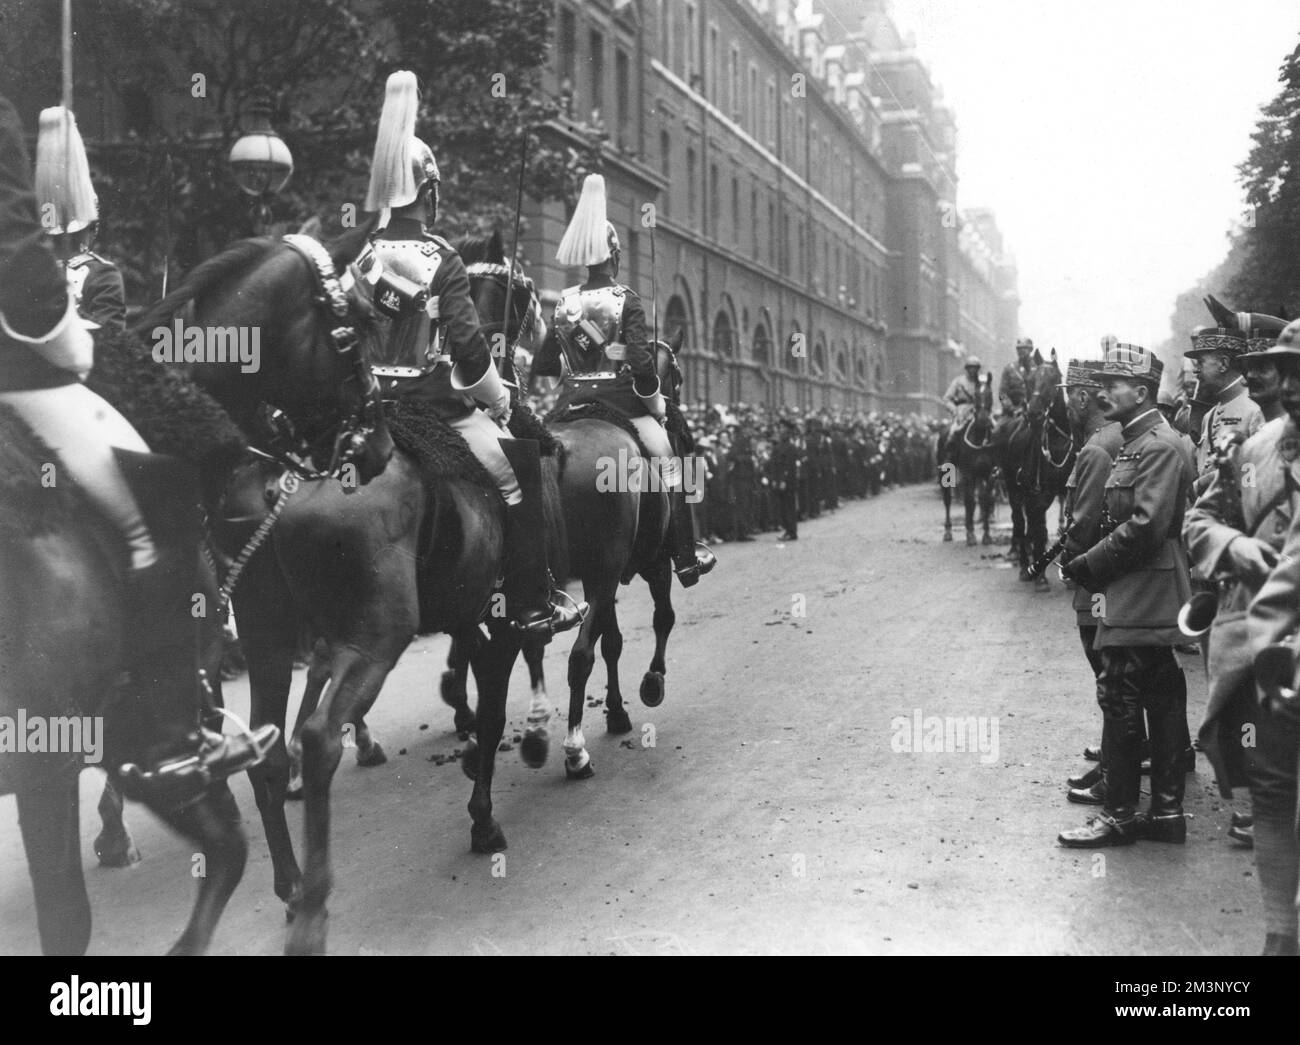 Marshal Foch and General Maxime Weygand, along with other French commanders and soldiers, watch the Household Cavalry pass along the Mall in London as part of the Victory parade Peace Day celebrations, 19th July 1919.     Date: 19th July 1919 Stock Photo